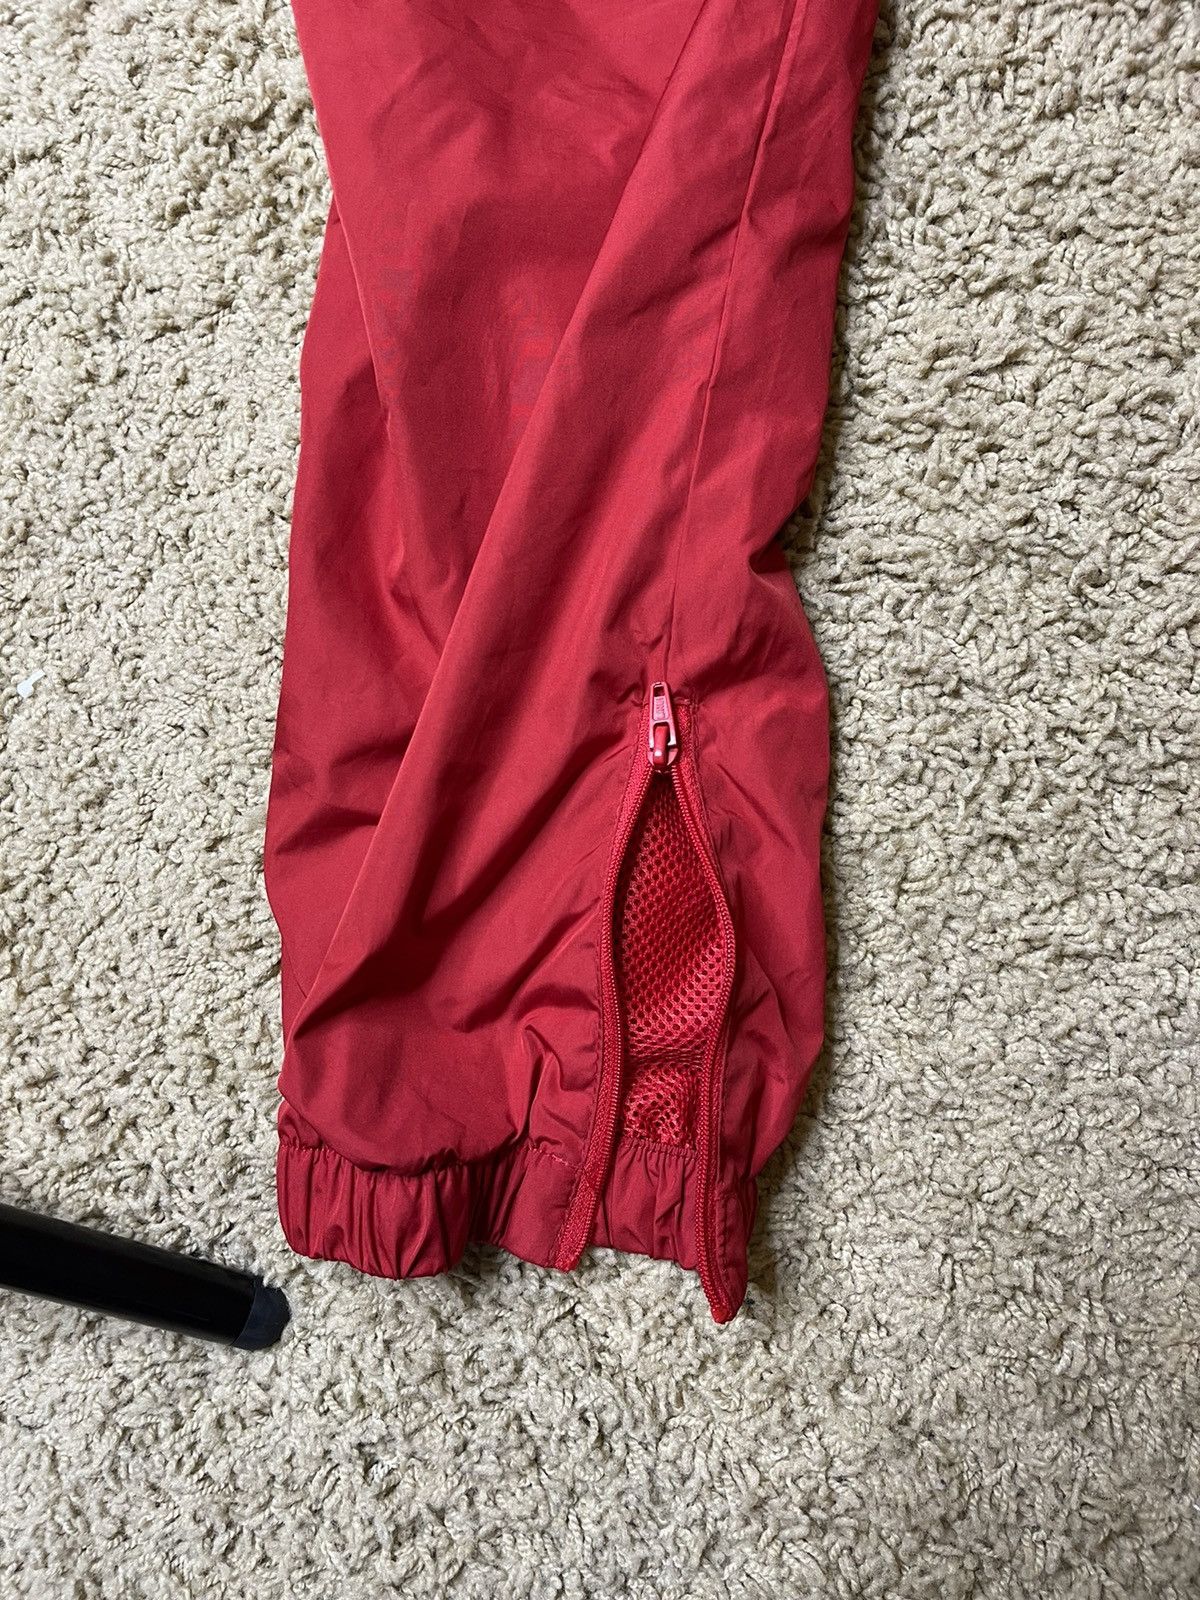 Guess Red GUESS tracksuit pant Size US 32 / EU 48 - 4 Thumbnail